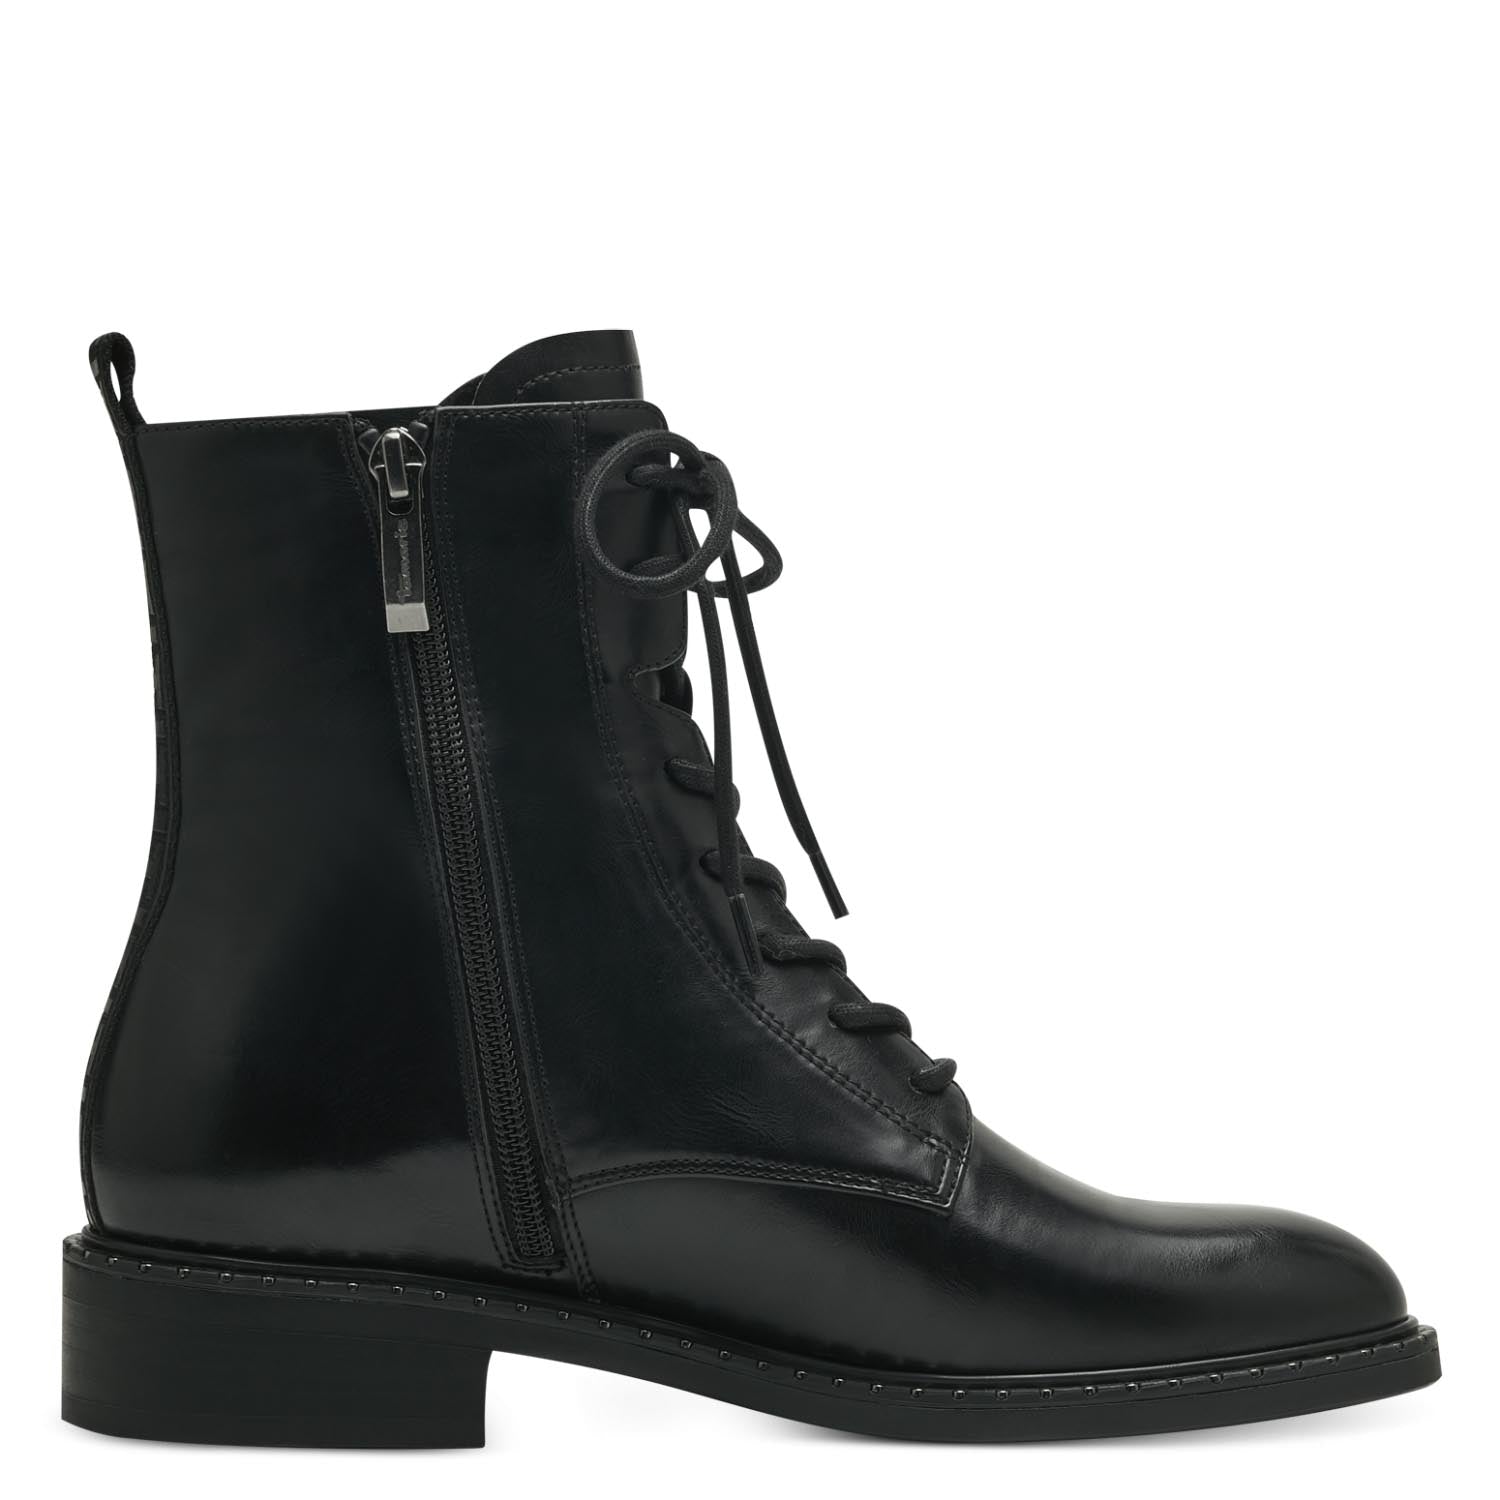 Side view of the Lace-Up Black Ankle Boots zipper